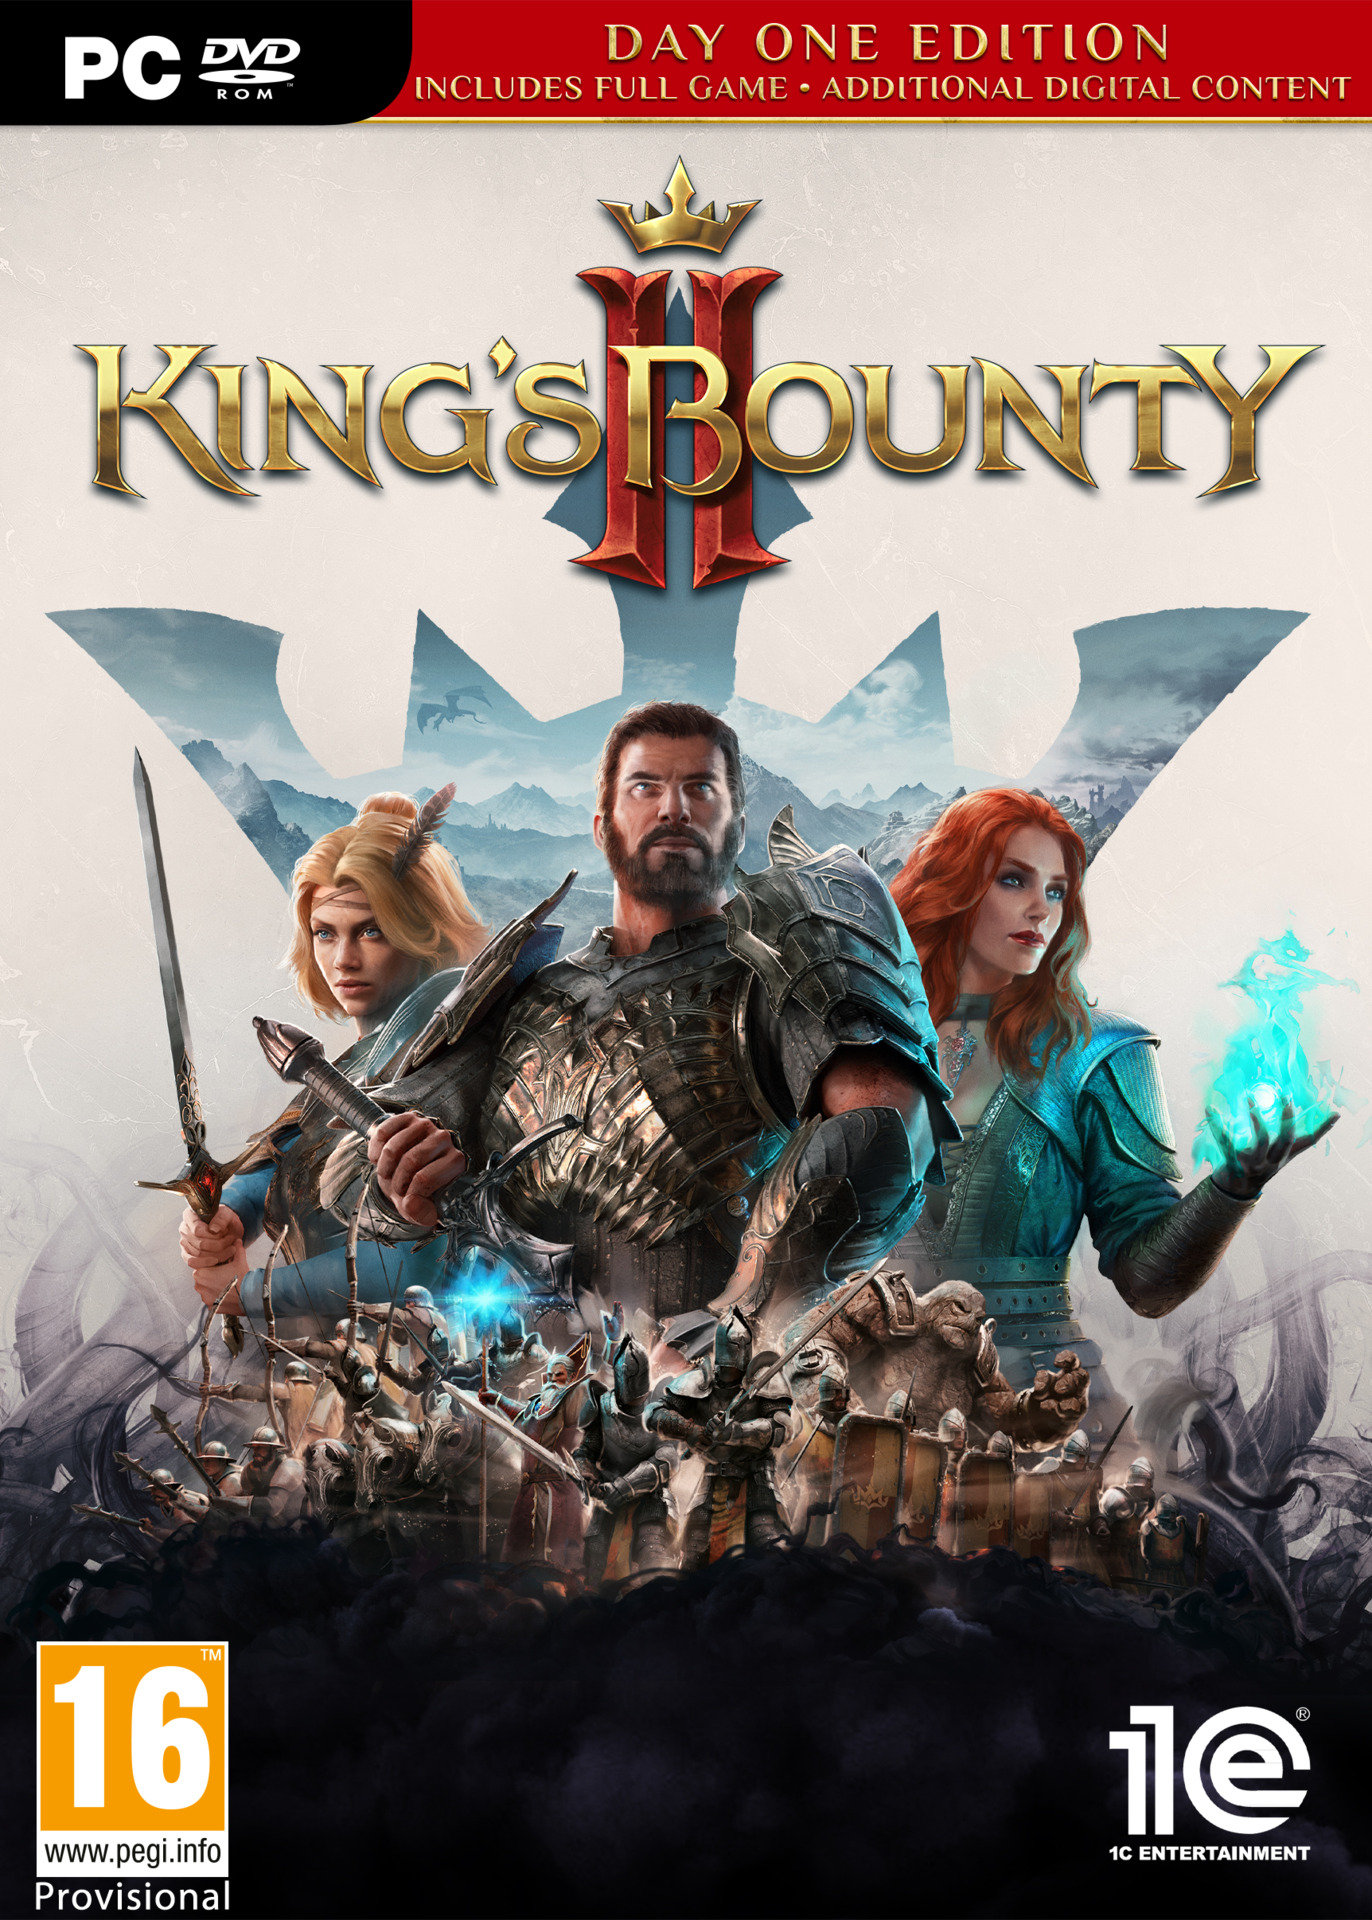 Kings Bounty 2 - Day One Edition (PC)